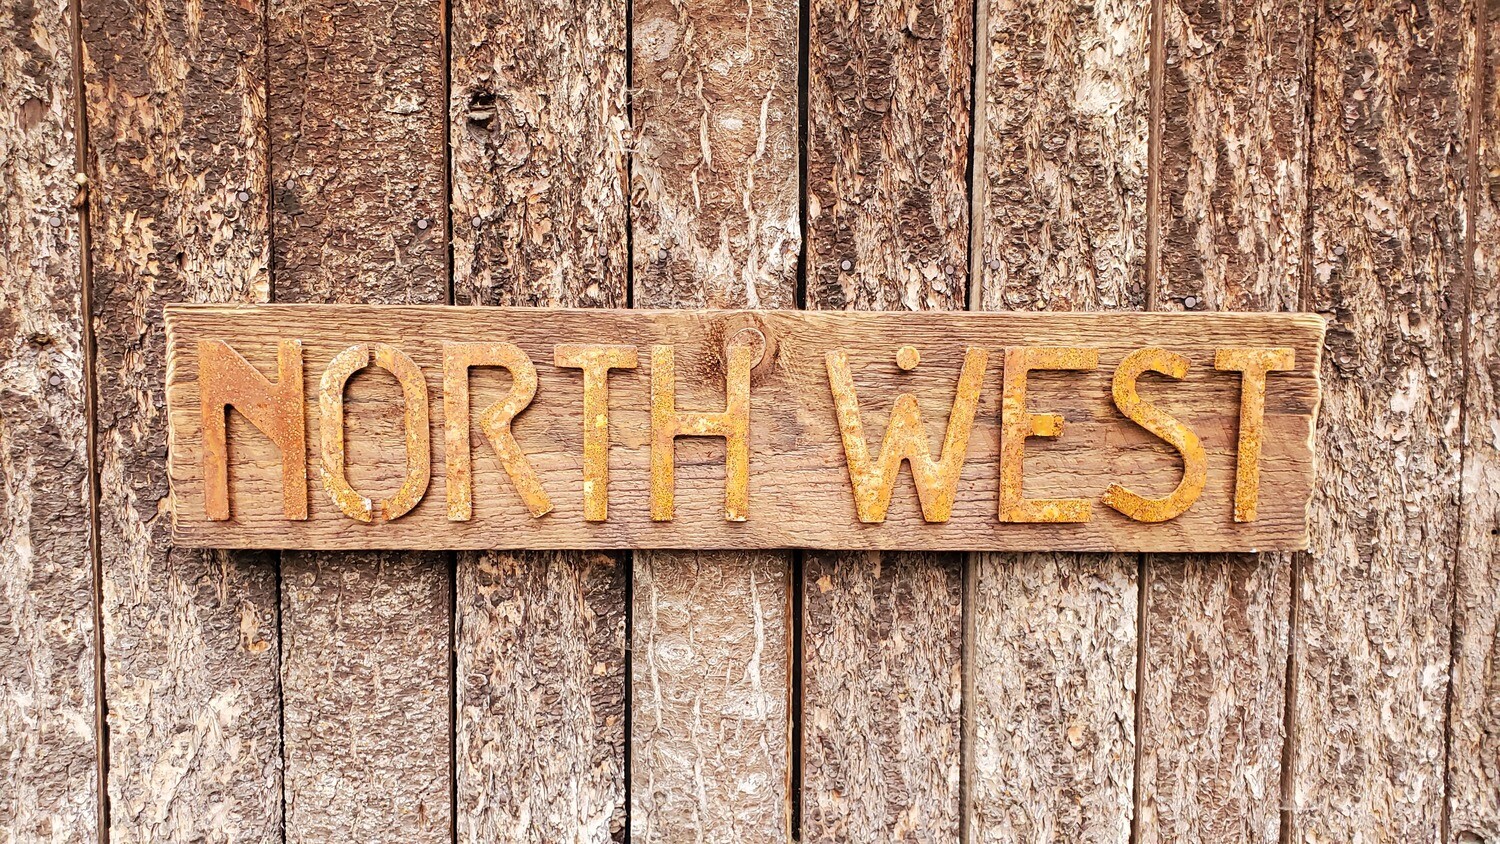 "NORTH WEST" LETTER SIGN, PACIFIC NORTHWEST COLLECTION